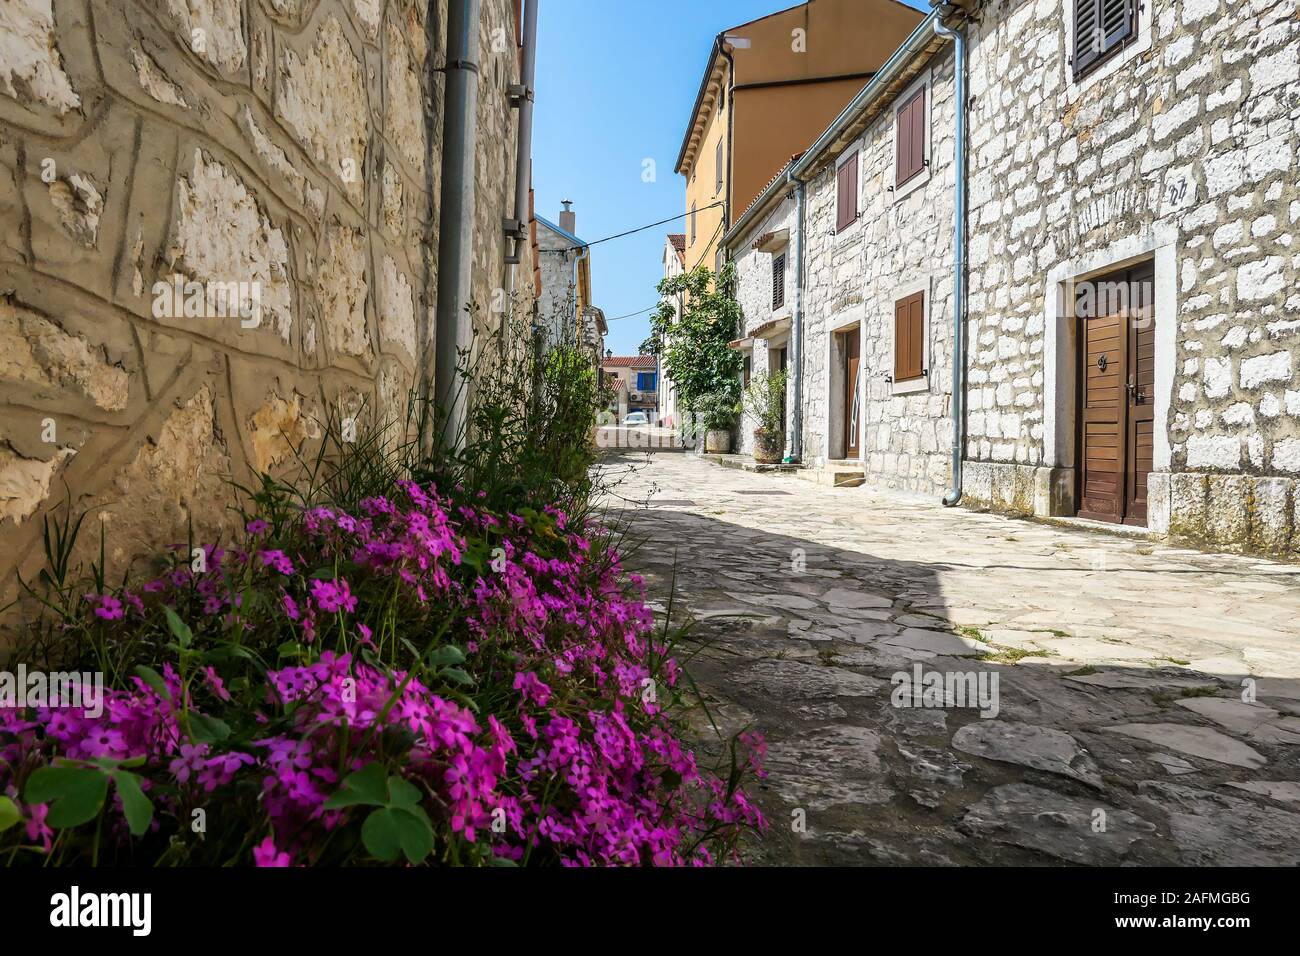 A little cobbles street in a Mediterranean country. The houses on both sides are made of stone. Beautiful window shutters. There are violet flowers gr Stock Photo